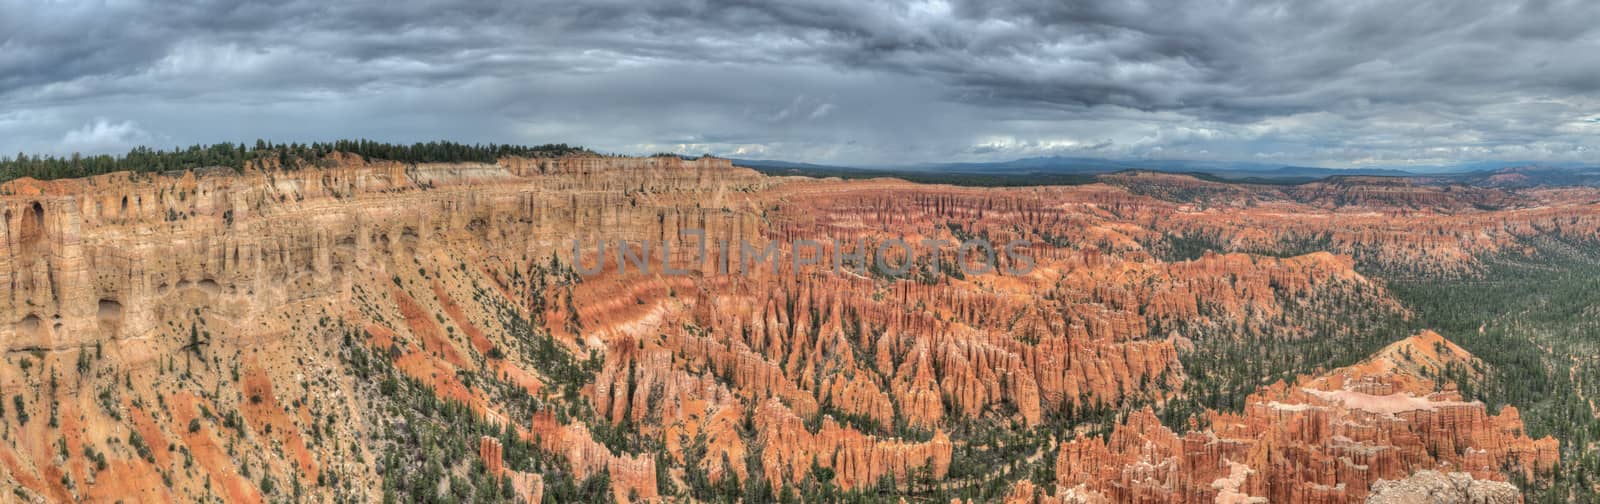 Panorama Bryce Canyon amphitheater by weltreisendertj